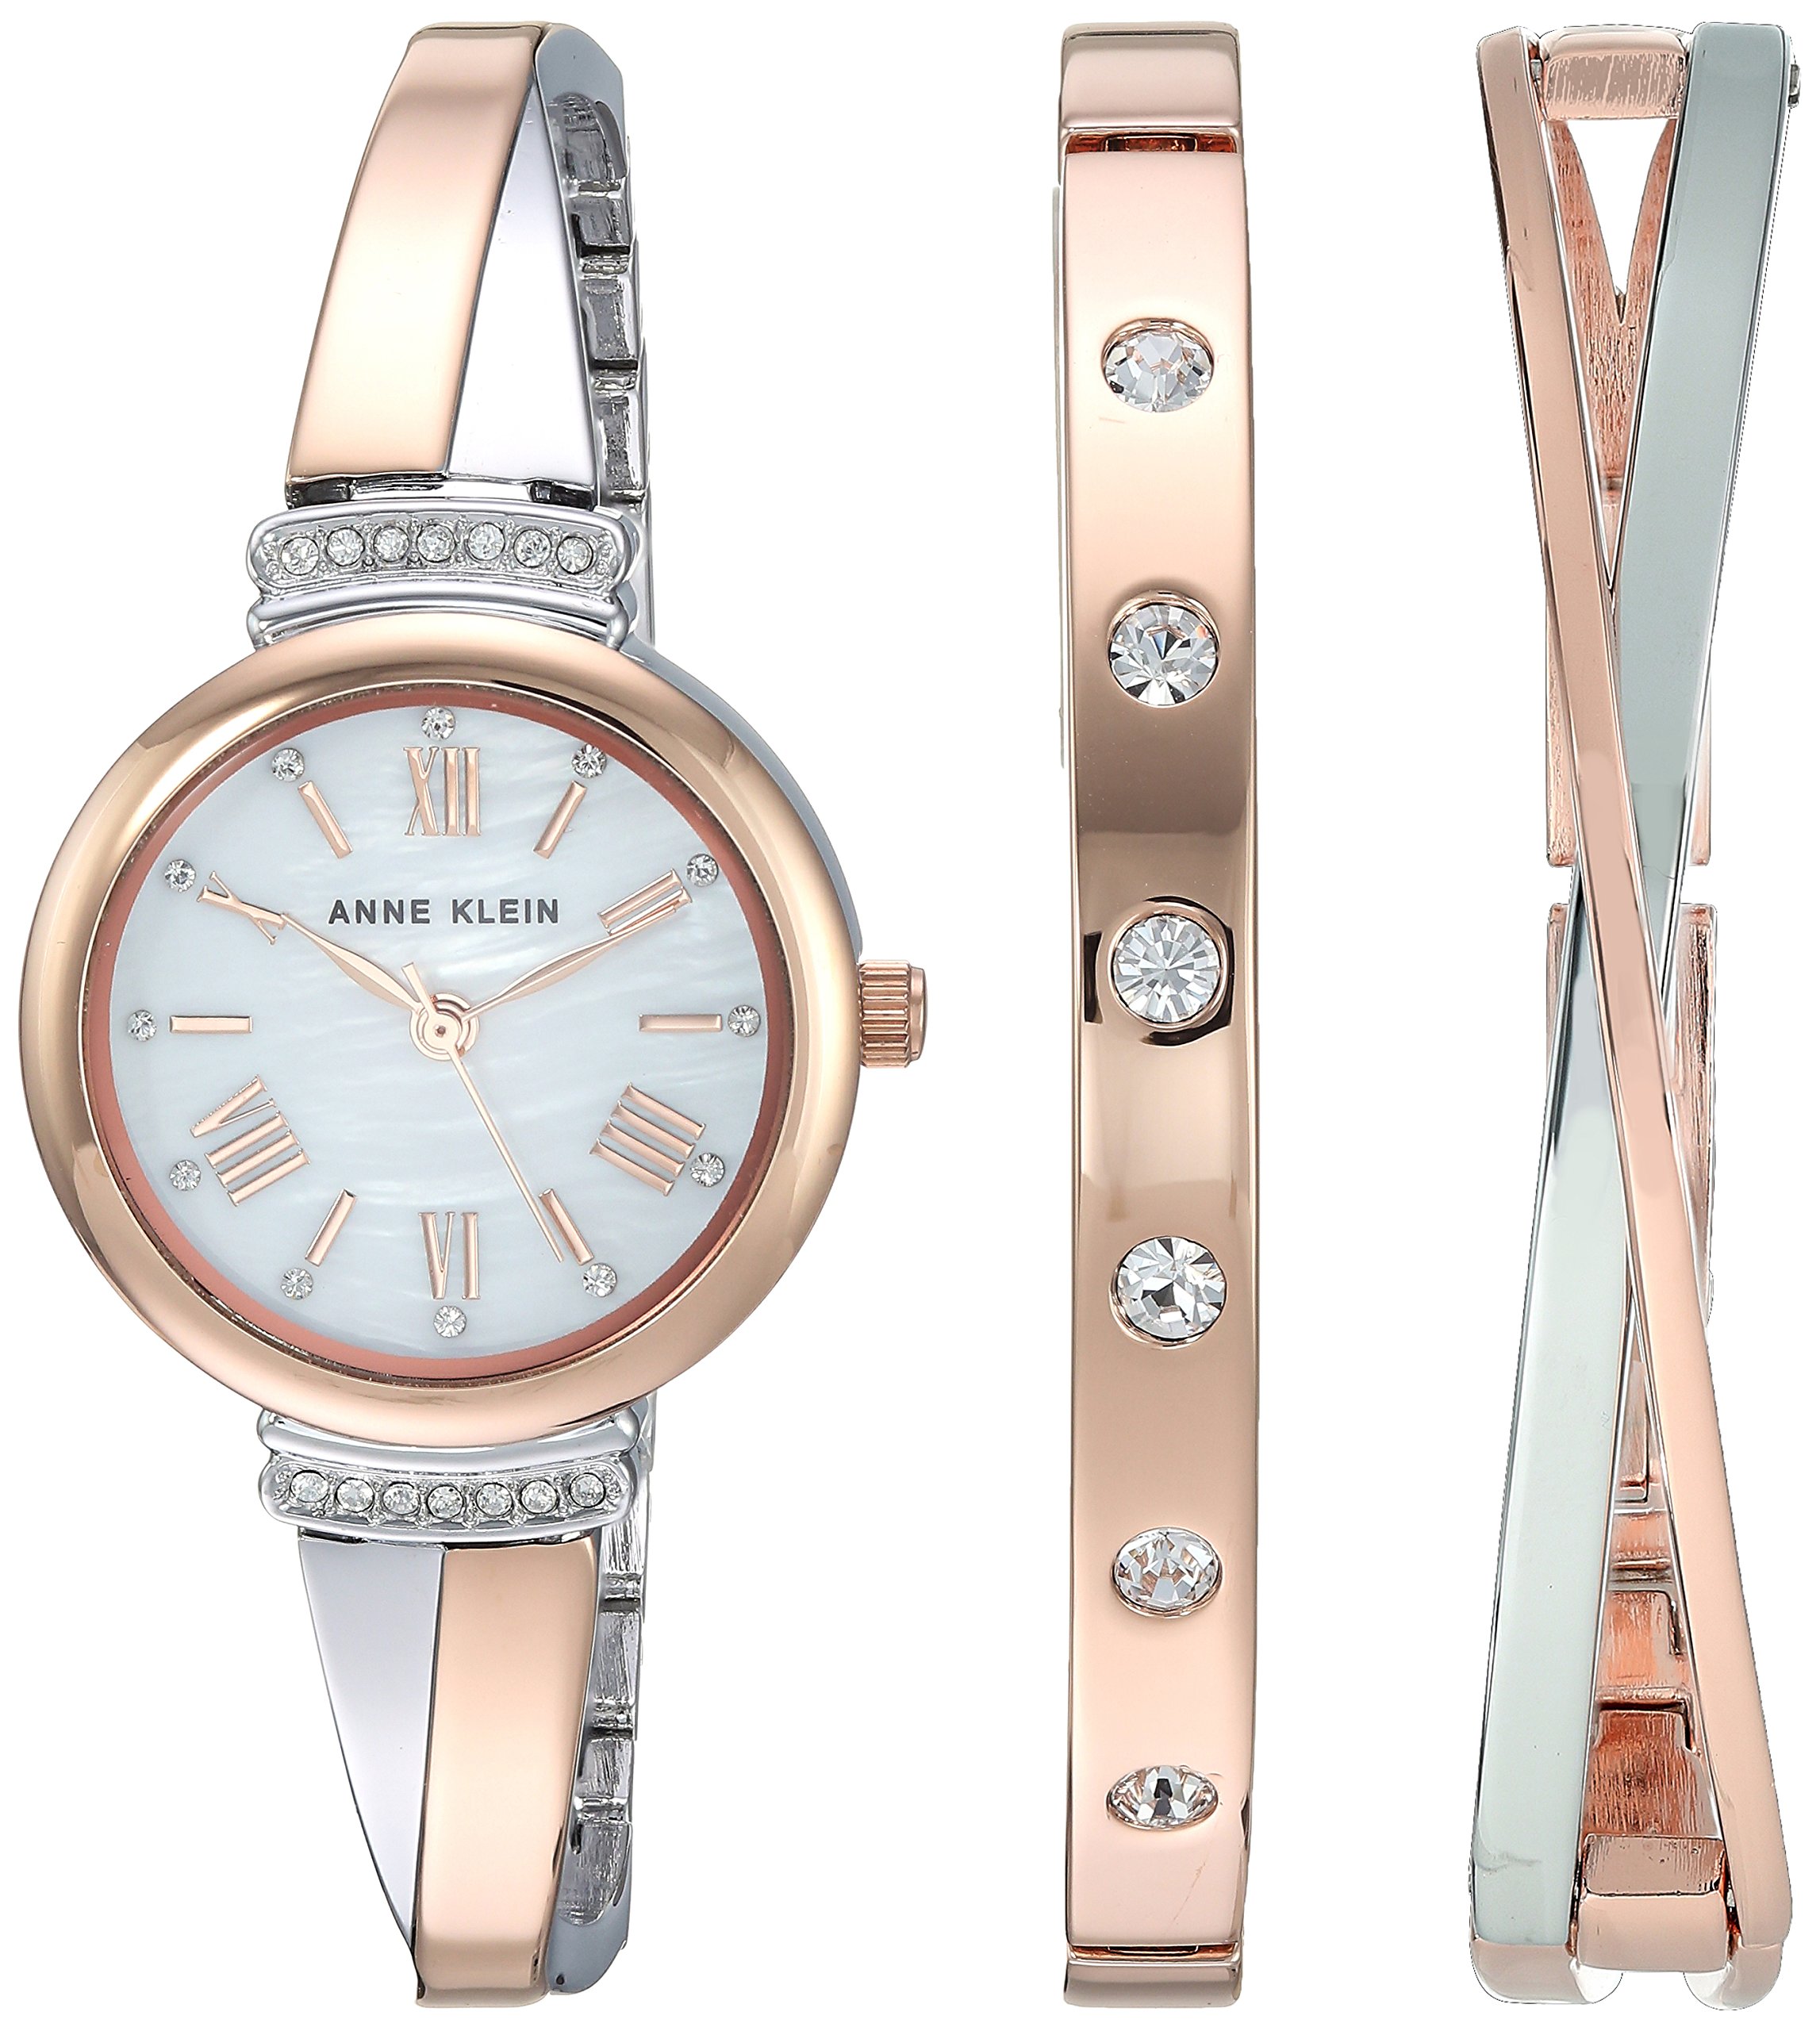 Limited-time deal: Anne Klein Women's Premium Crystal Accented Bangle Watch Set, AK/2245 - $40.82